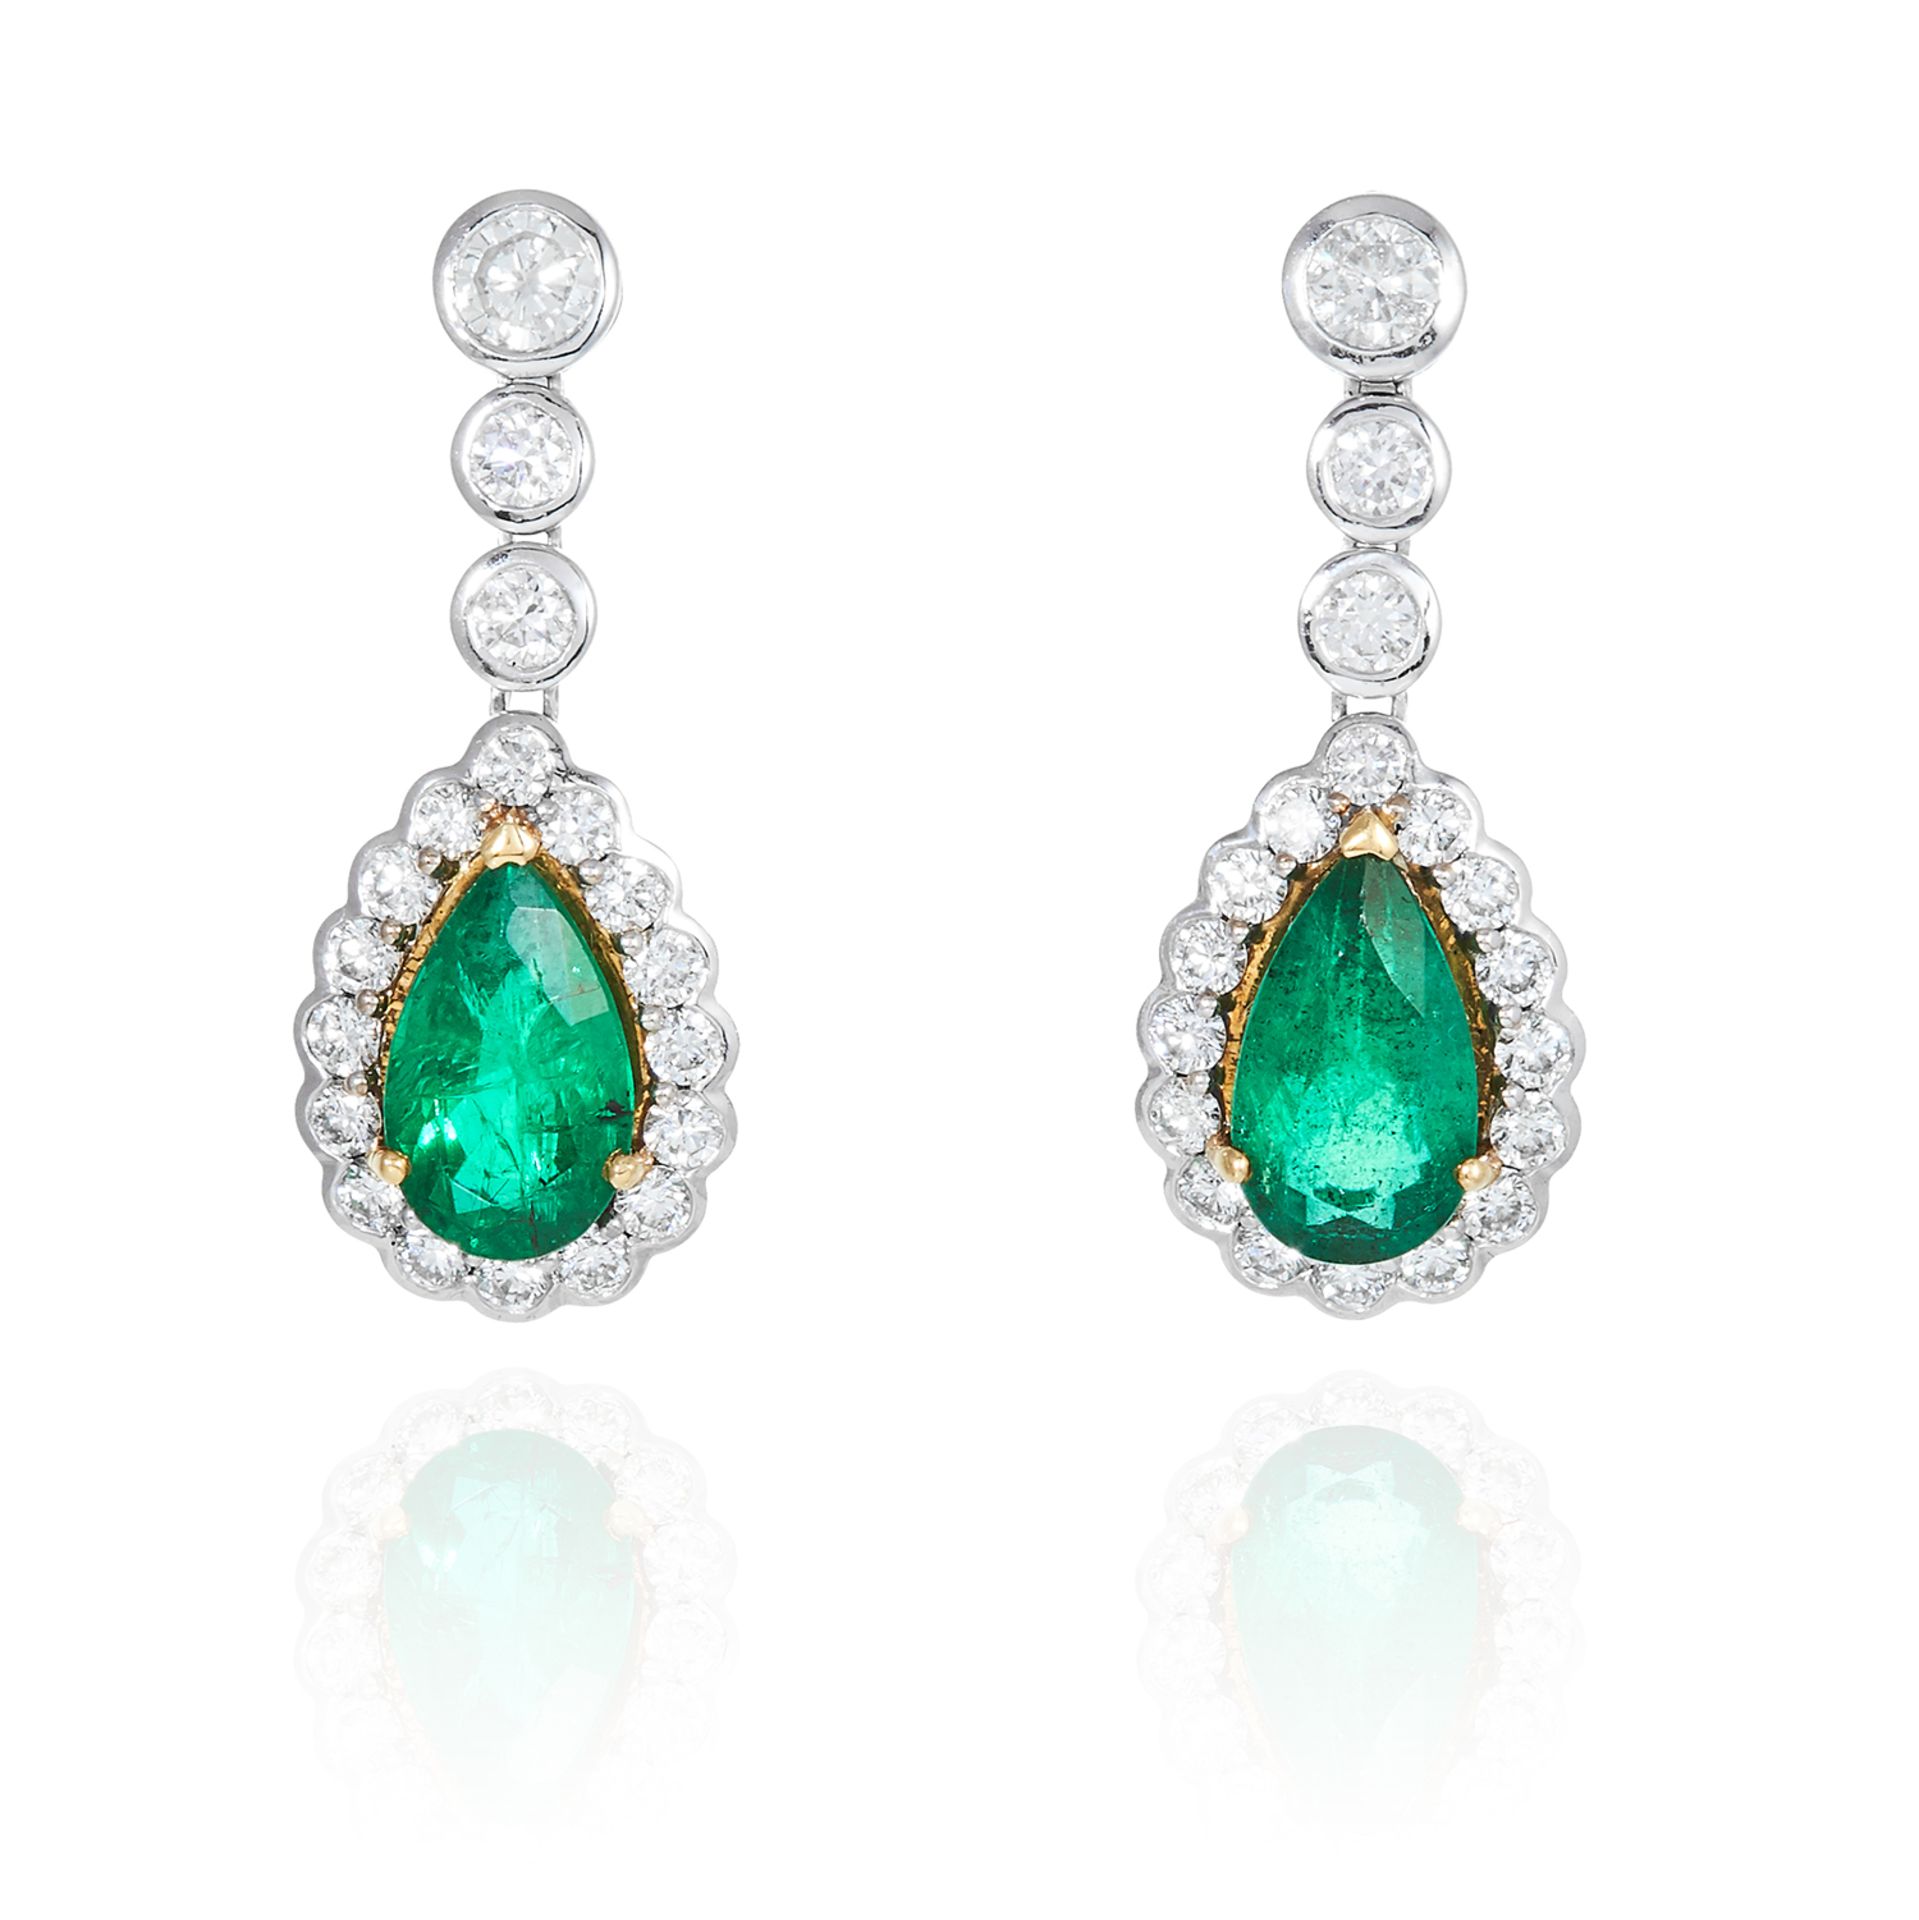 A PAIR OF EMERALD AND DIAMOND EARRINGS in 18ct white gold, each set with a pear cut emerald